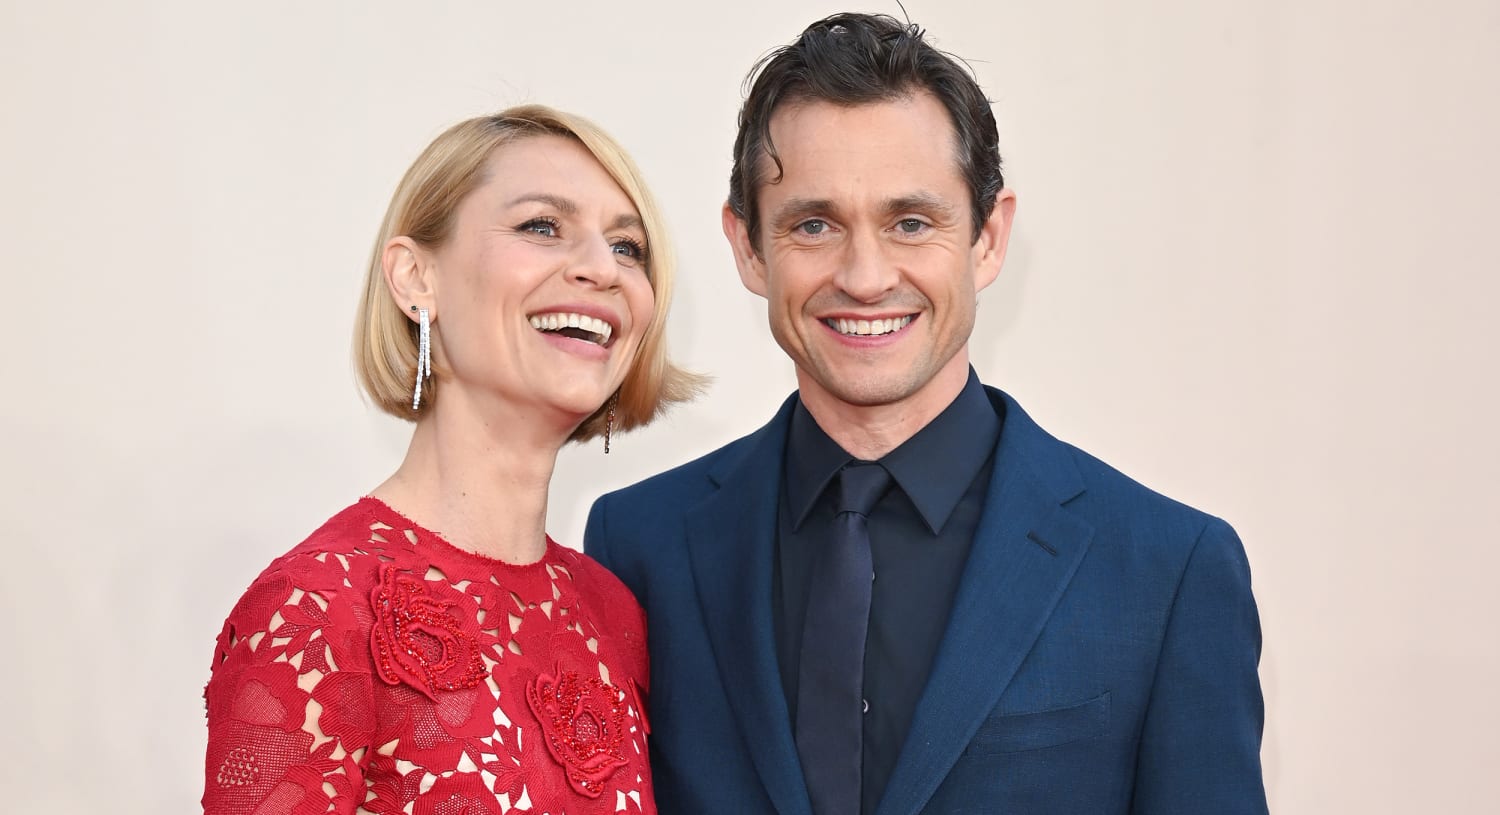 Claire Danes Shares Sons' Hilarious Reactions to Her 3rd Pregnancy